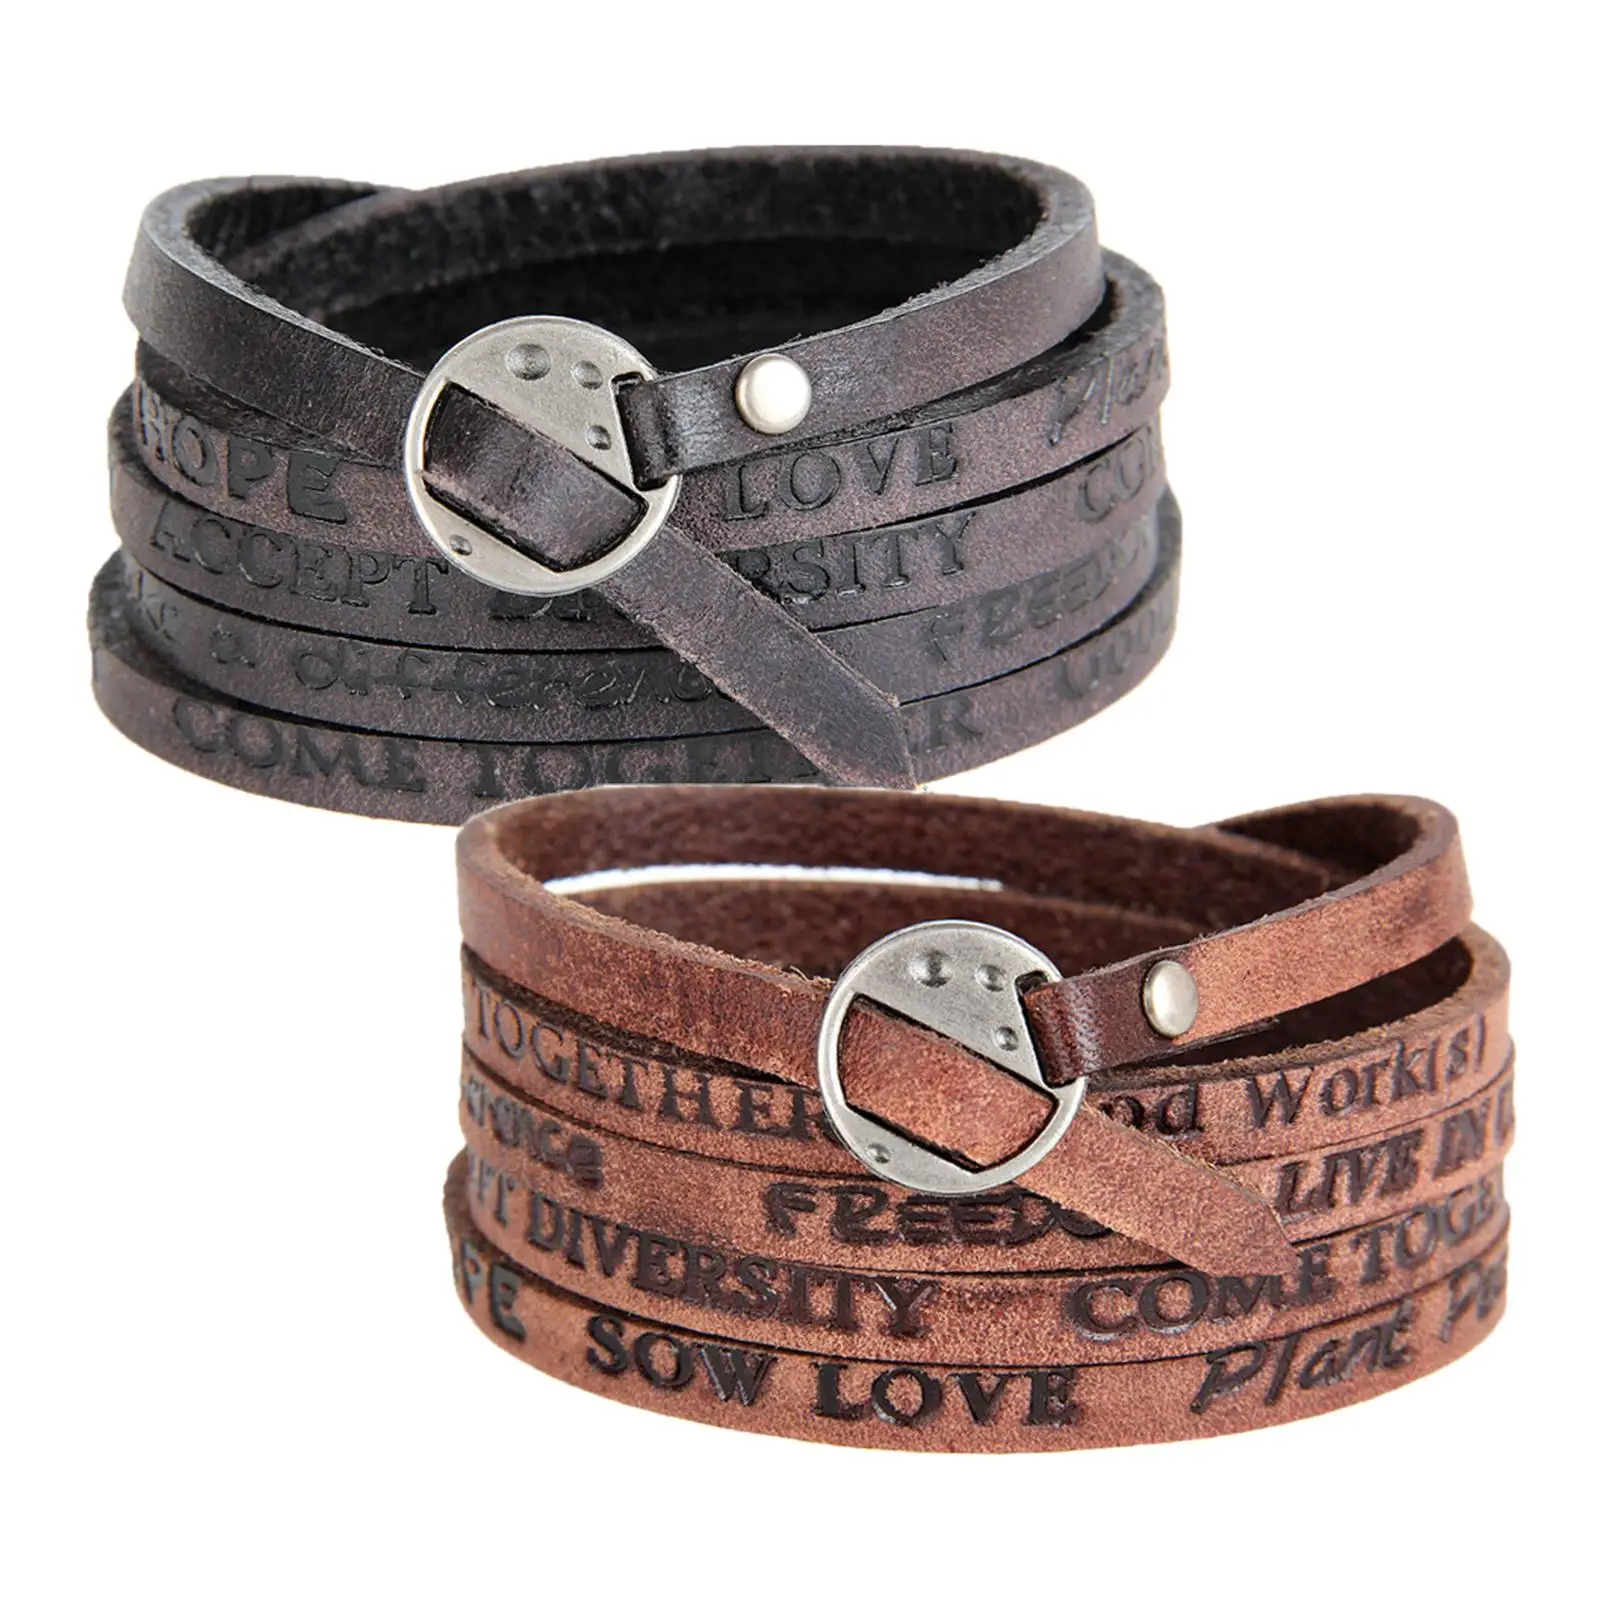 PU Leather Wide Bracelet Punk Gifts Jewelry Vintage Adjustable Cuff Bangles for business Clothing Friendship Teen Men